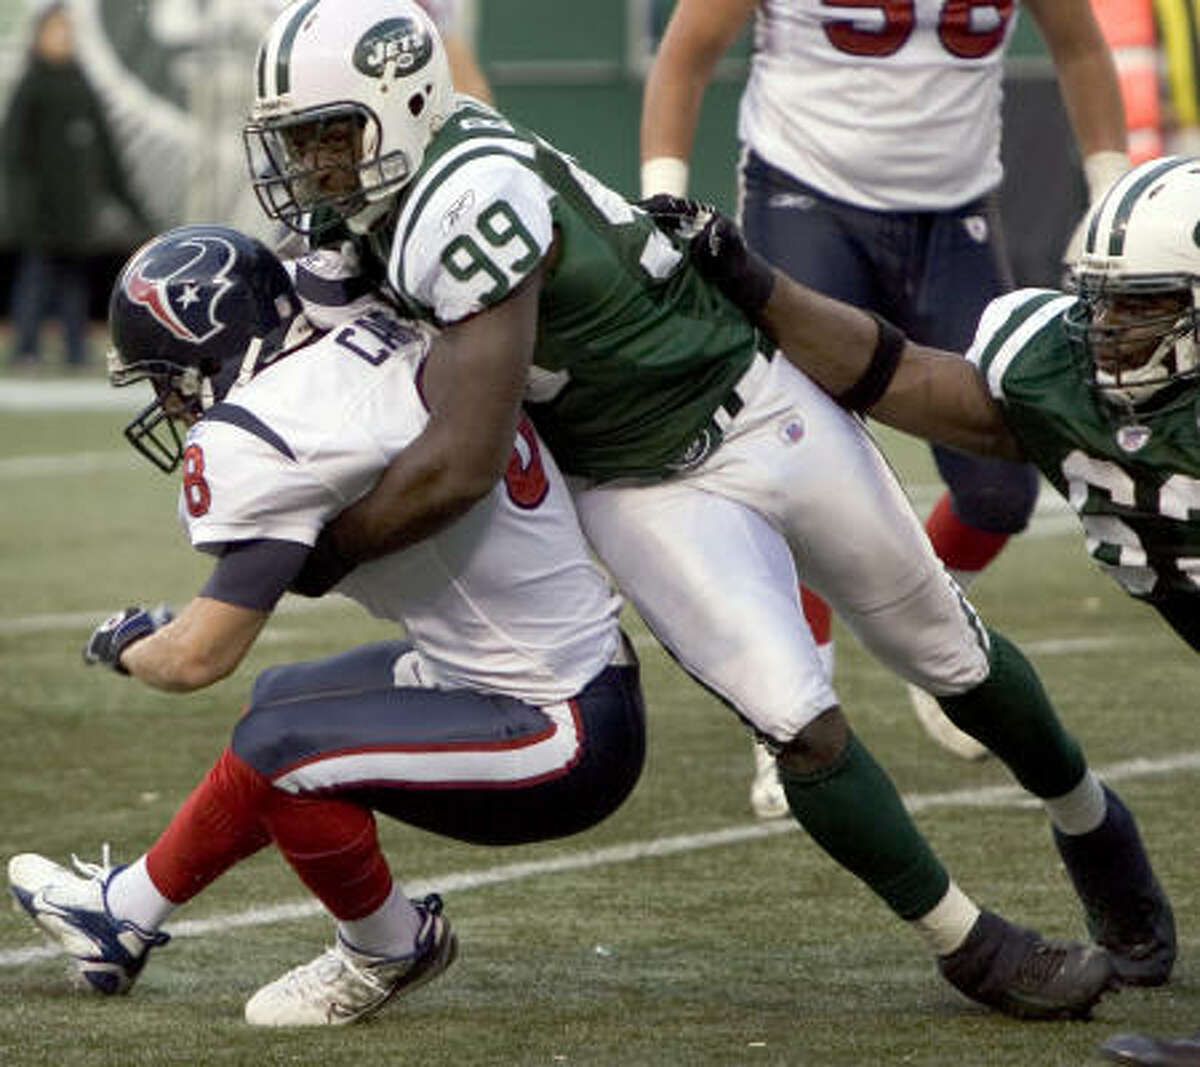 David Carr passed for 321 yards against the Jets but was only able to lead the Texans to 11 points.